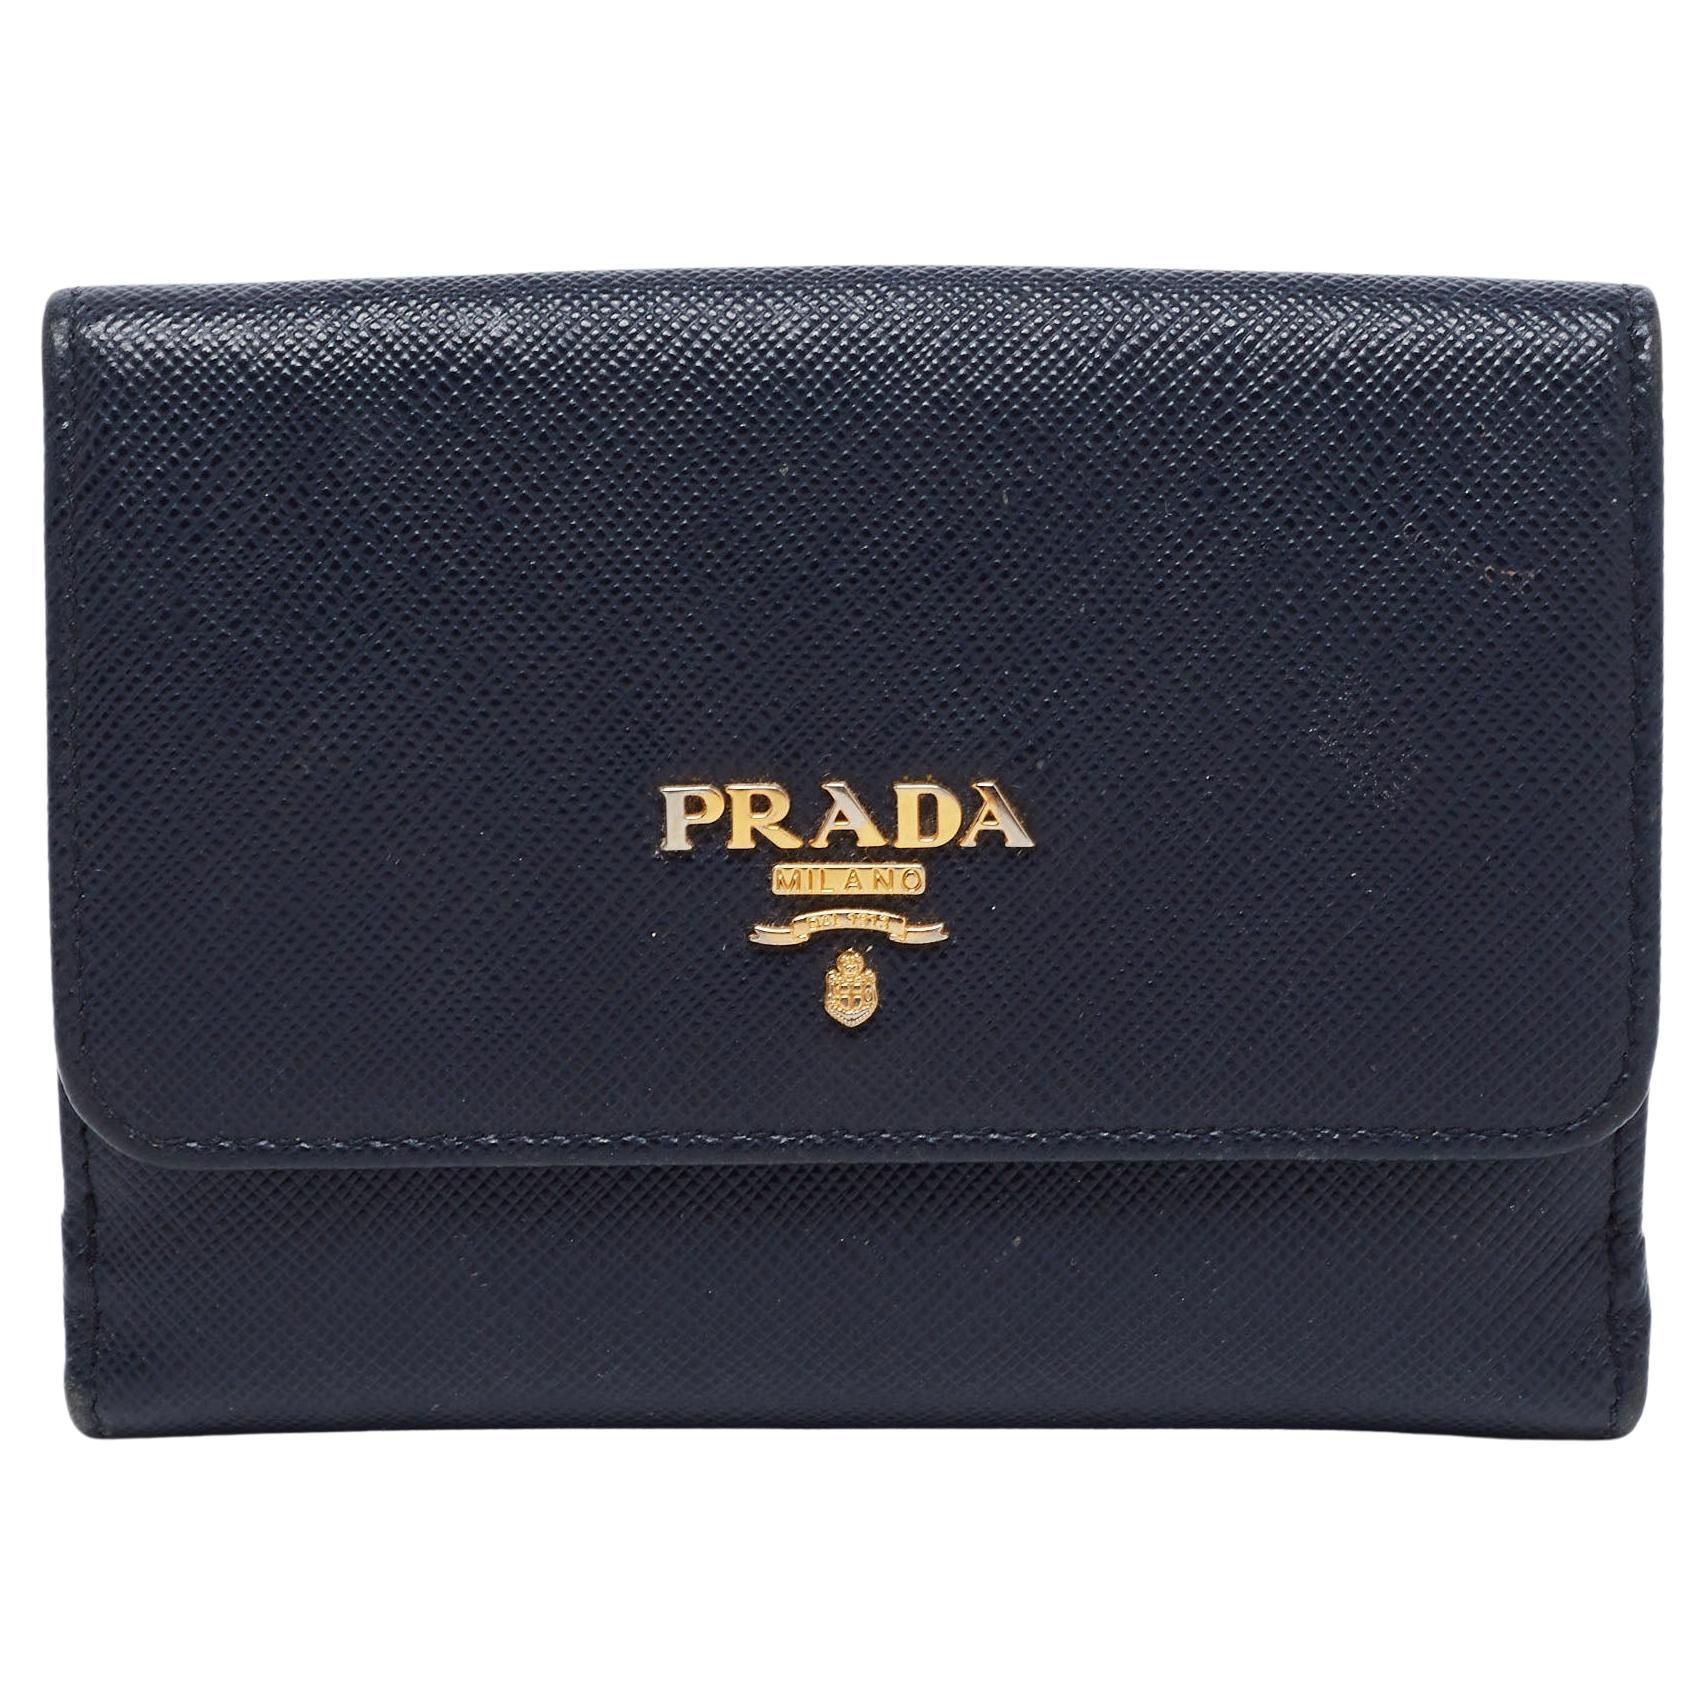 Prada Navy Blue Saffiano Metal Leather French Compact Wallet